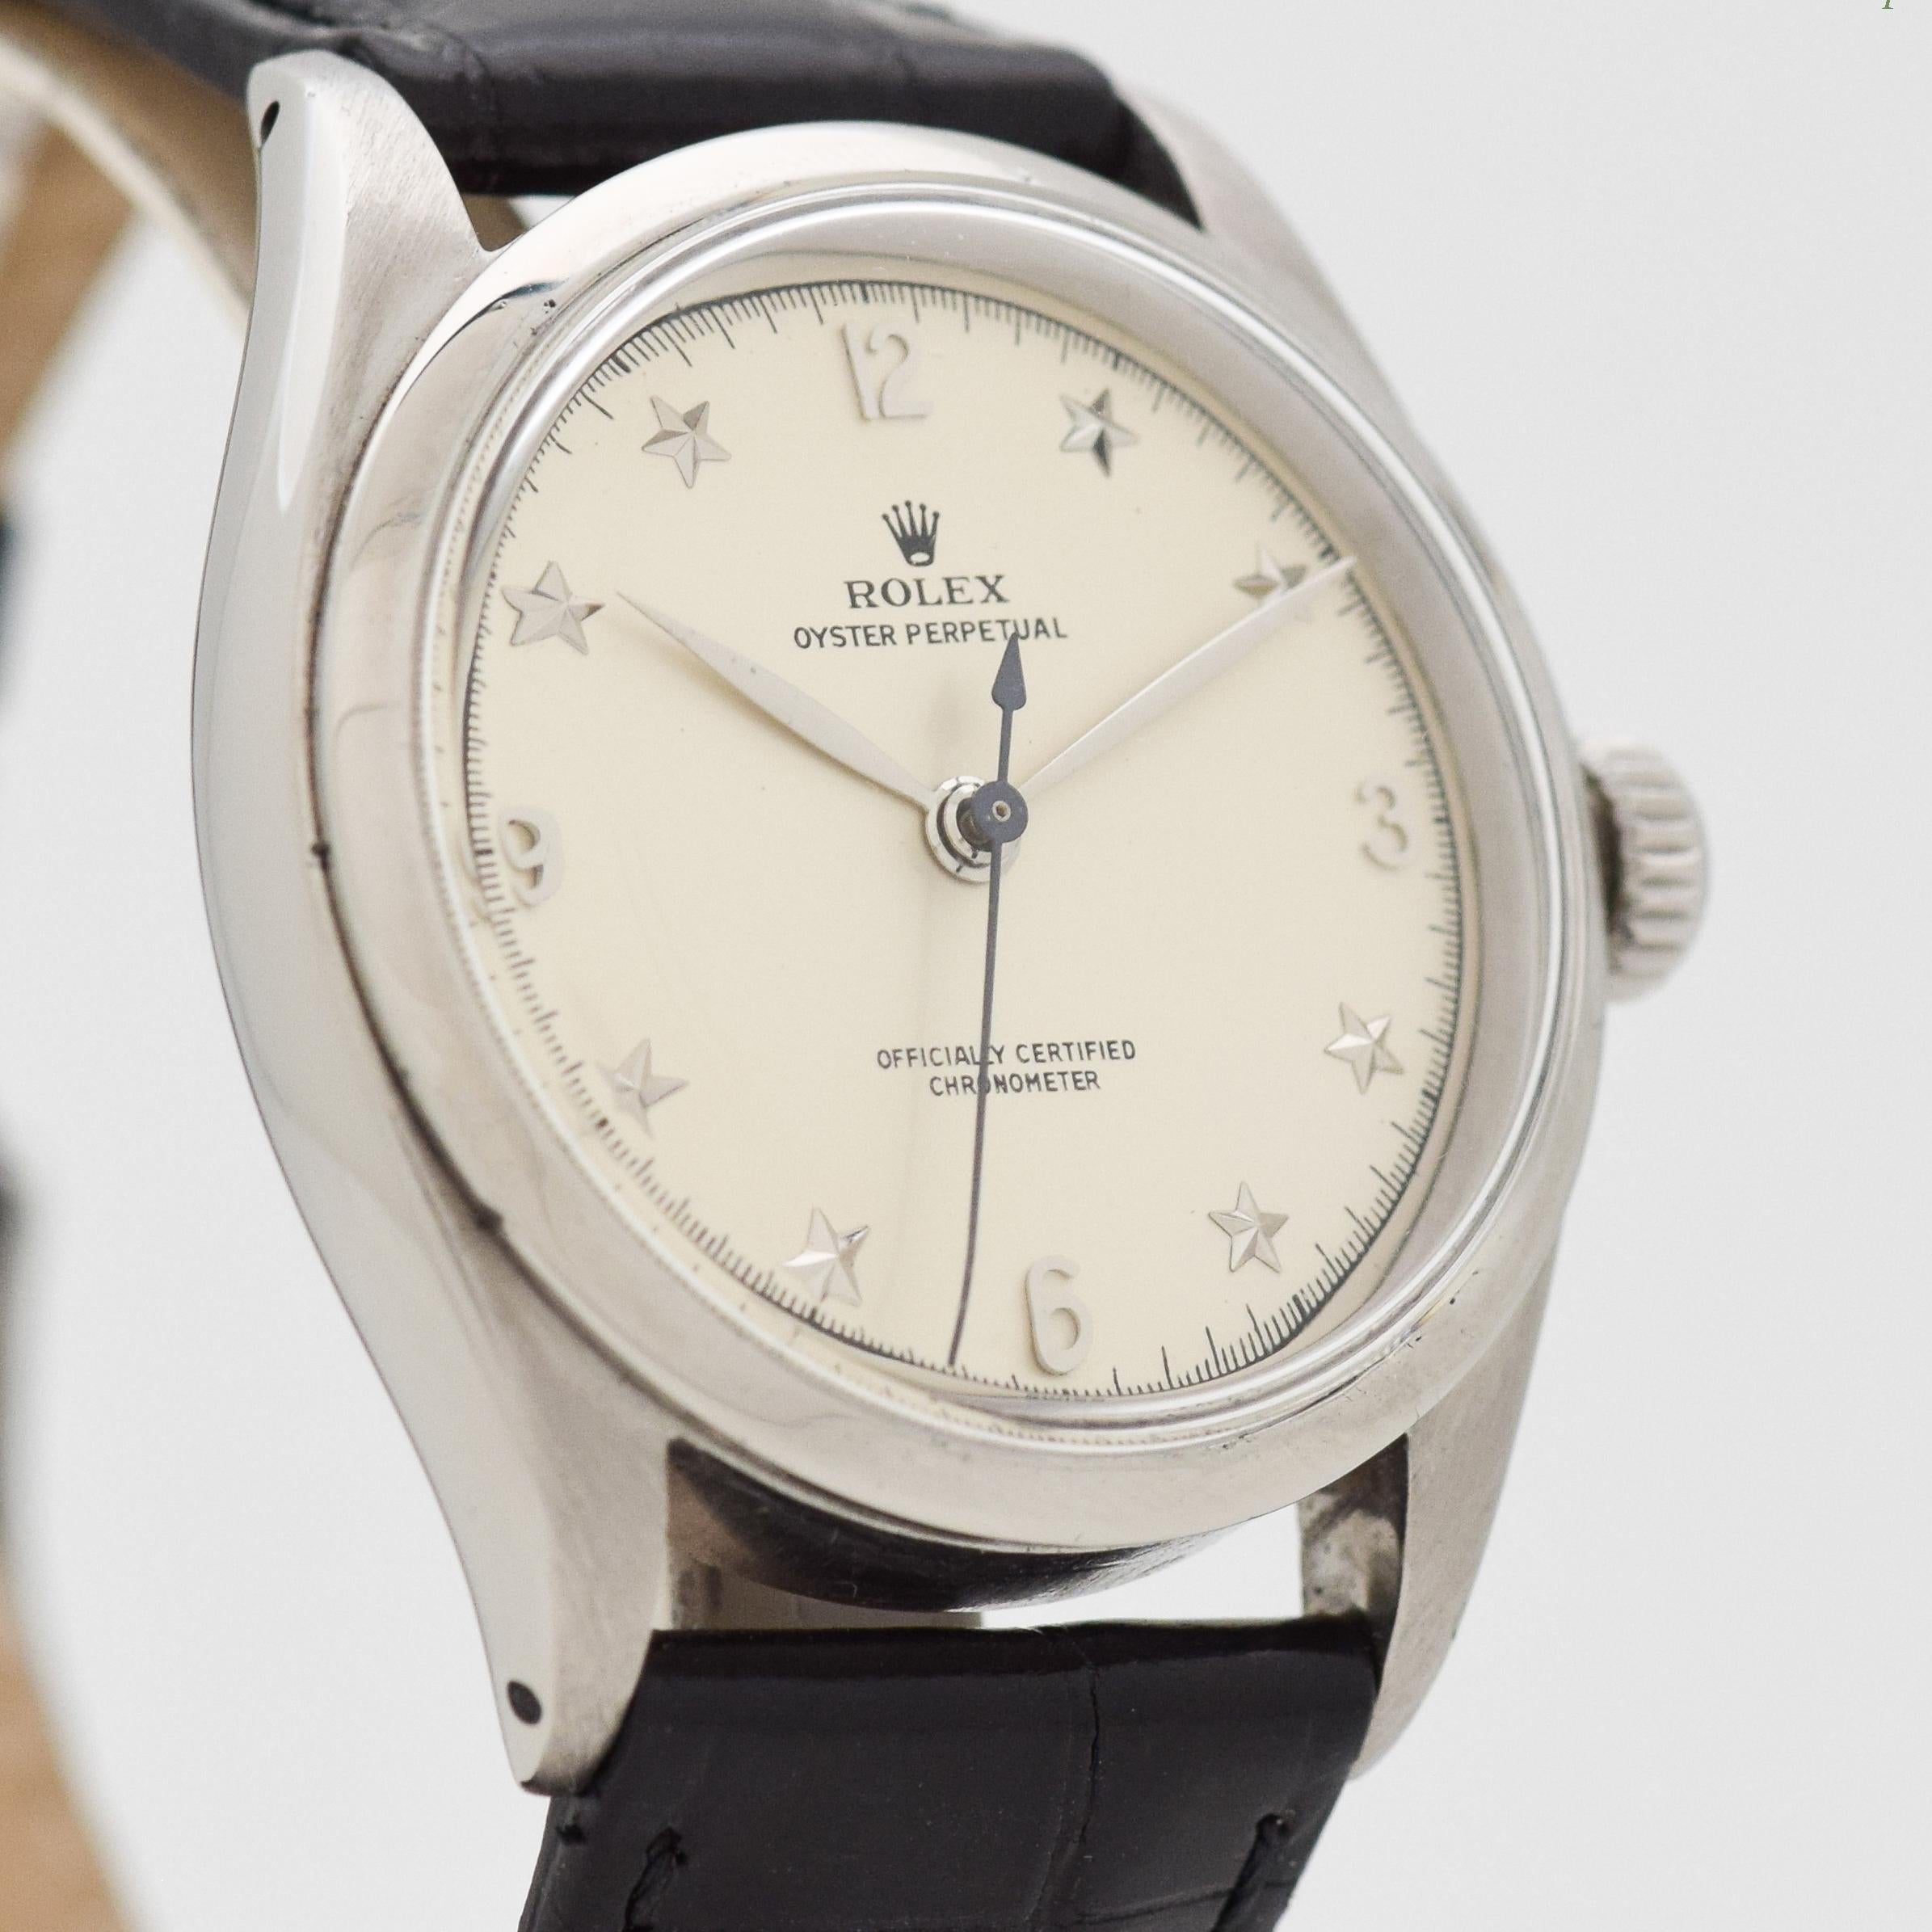 1953 Vintage Rolex Oyster Perpetual Semi-Bubbleback Ref. 6284 Stainless Steel watch with Silver Star Dial with Applied Steel Arabic 3, 6, 9, and 12 with Star Markers. 34mm x 39mm lug to lug (1.34 in. x 1.54 in.) - 18 jewel, automatic caliber